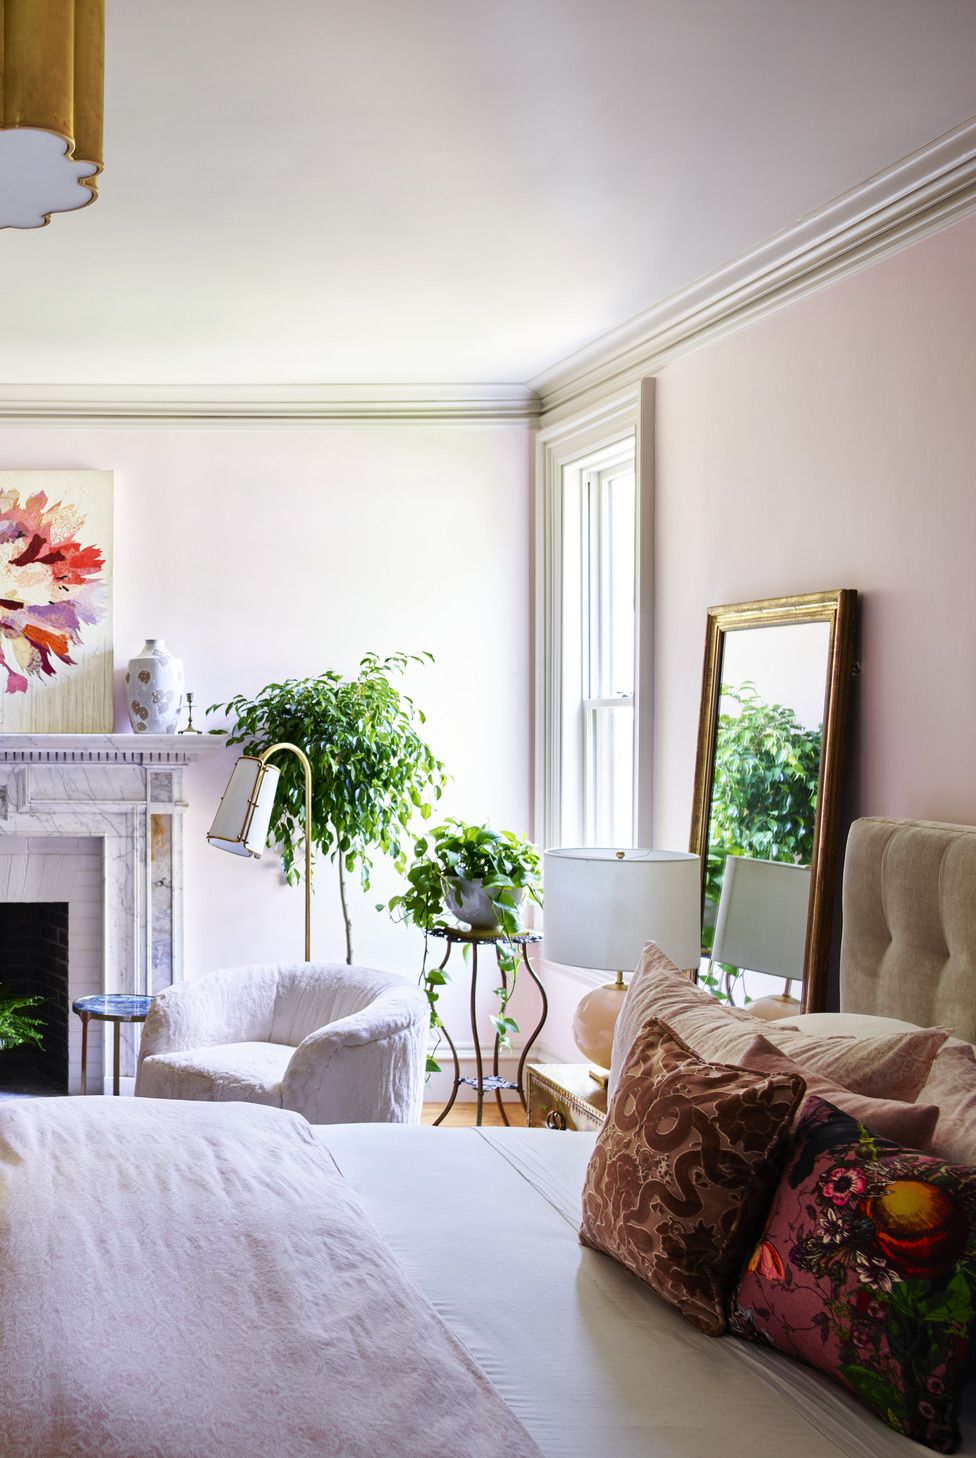 primary bedroom
casagrande salvaged this
marble mantel from a home in a
neighboring town built in the same
period wall paint middleton
pink, farrow  ball ceiling light
alexa hampton for circa lighting
art christopher
peter above
fireplace jordan piantedosi
dresser and rug chairish